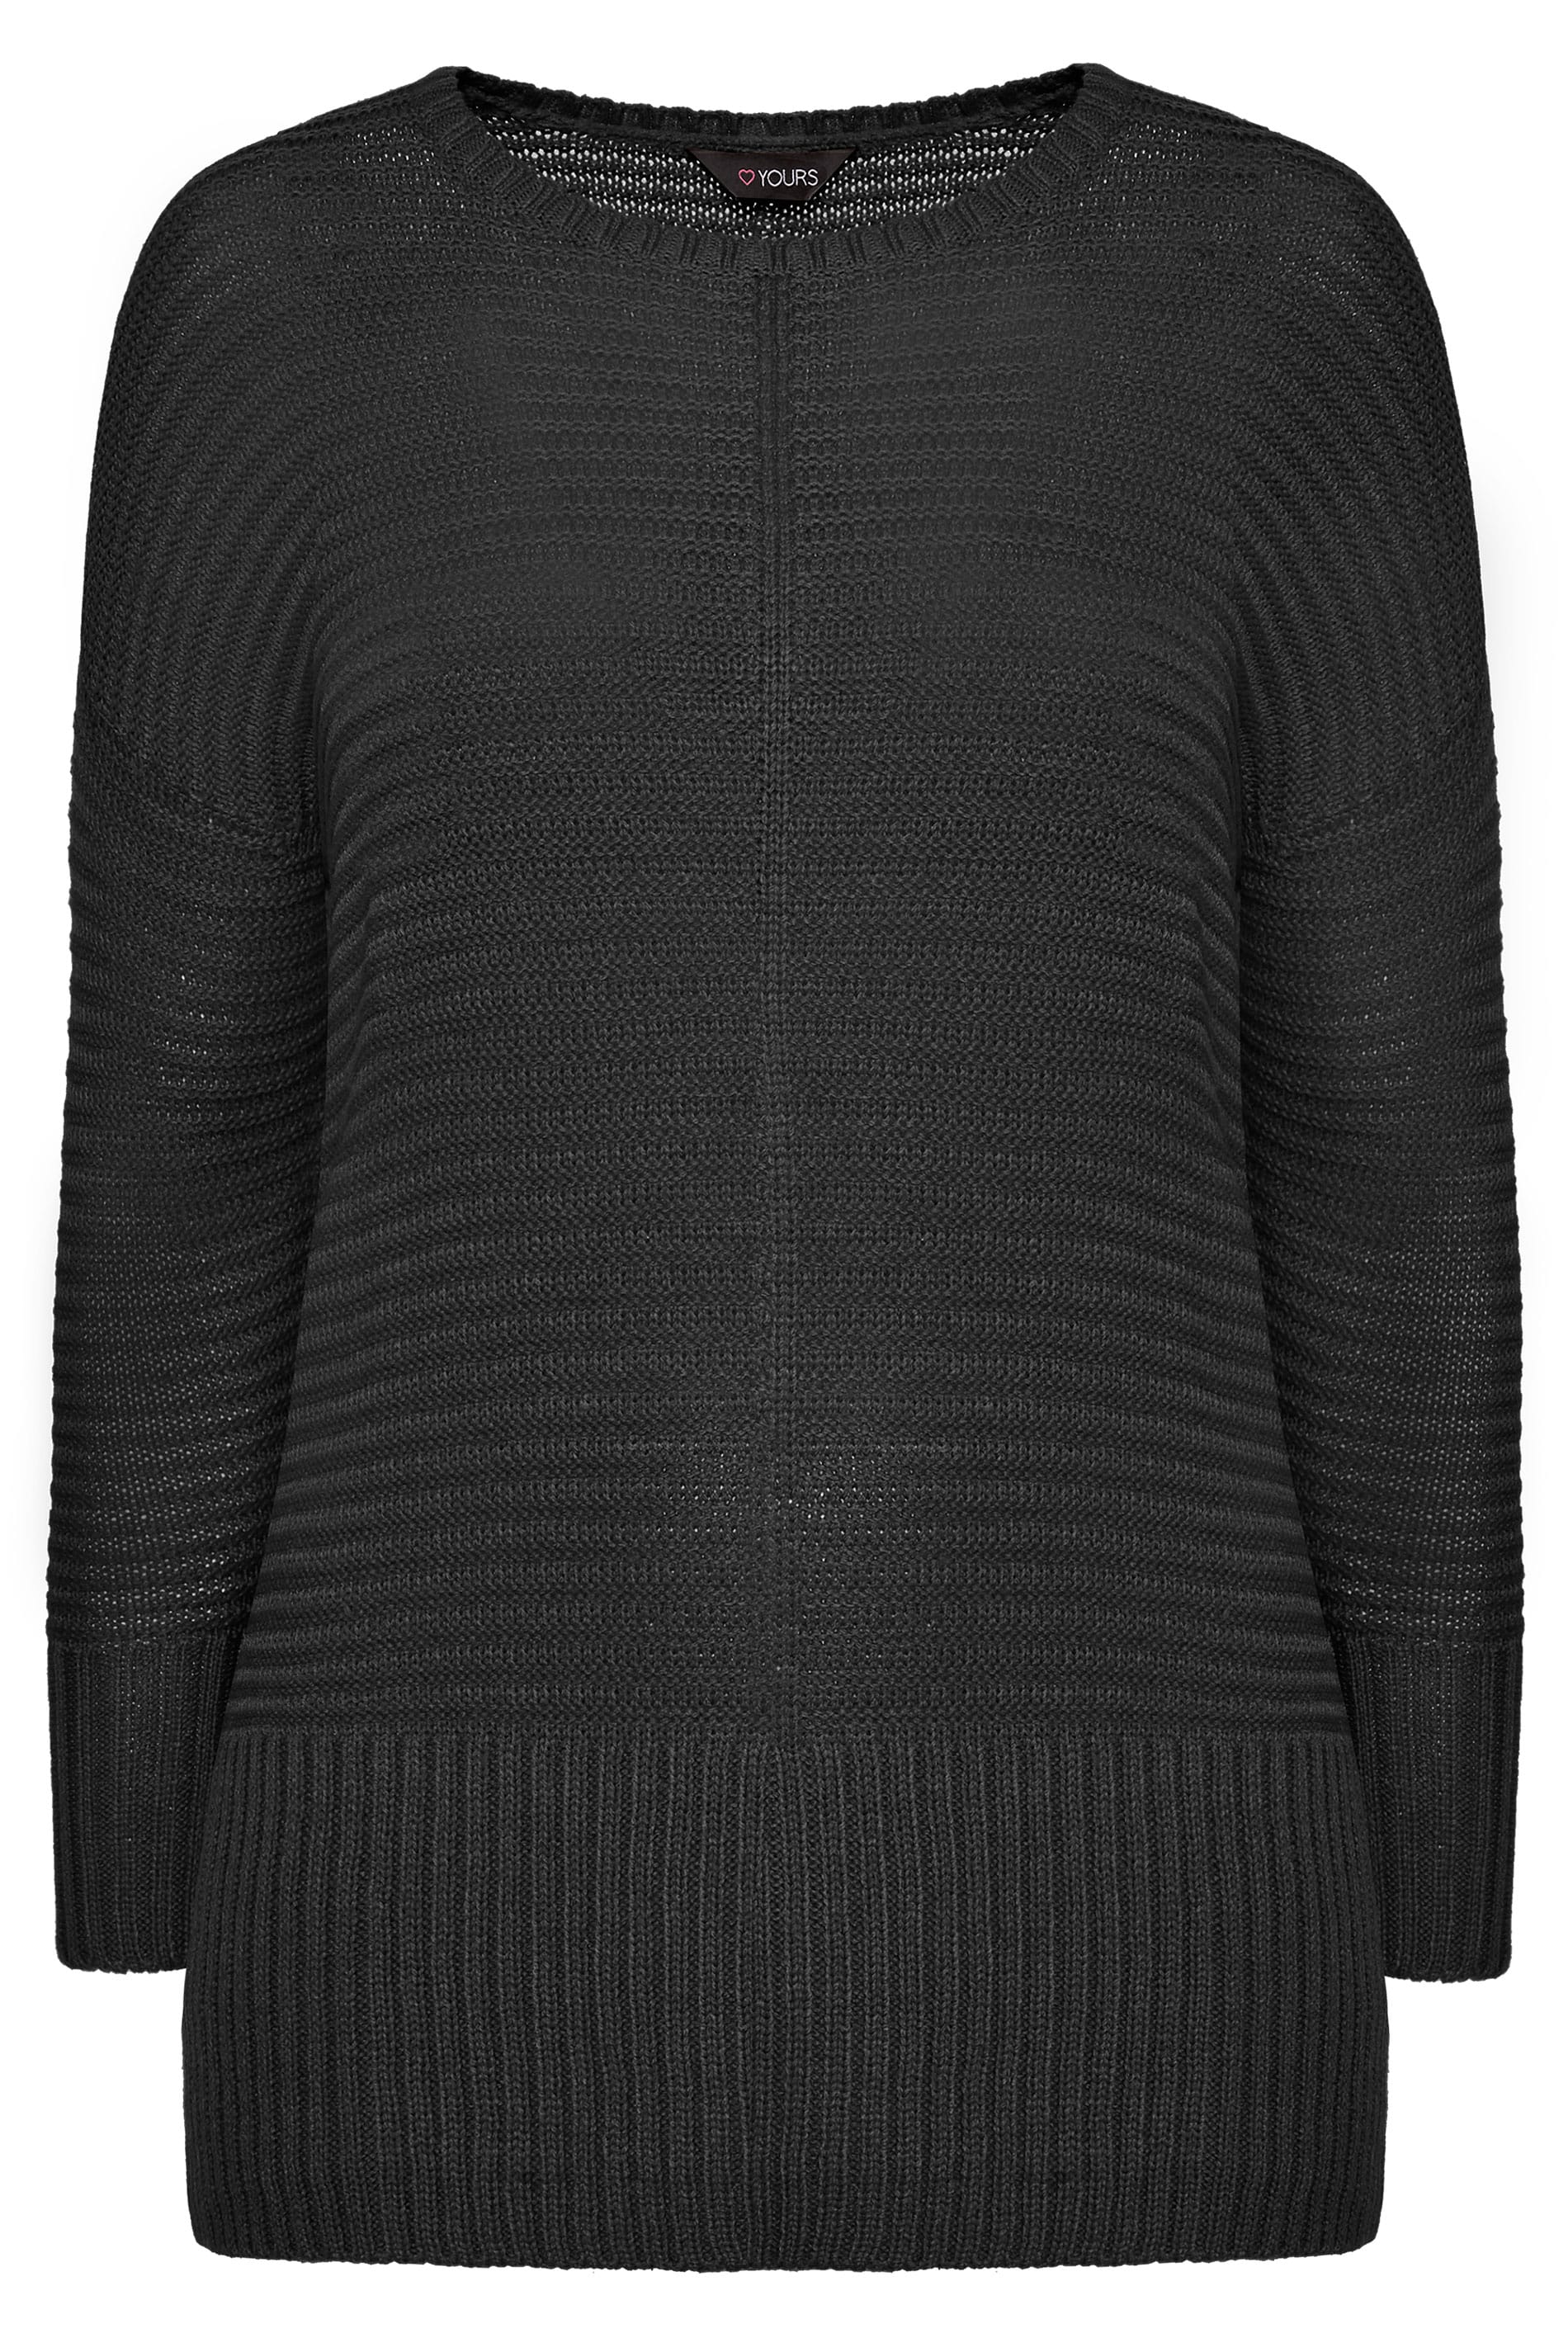 Black Ribbed Knitted Jumper | Sizes 16-36 | Yours Clothing